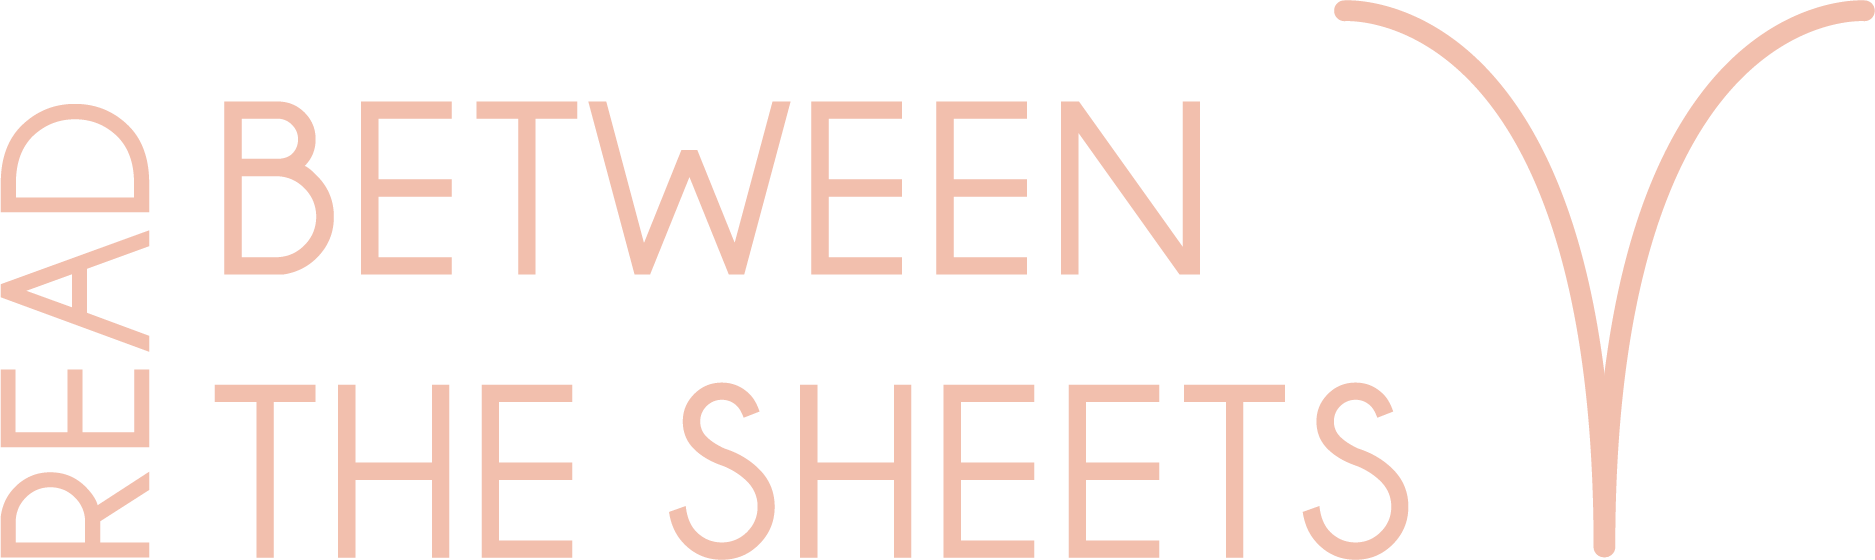 Read Between the Sheets